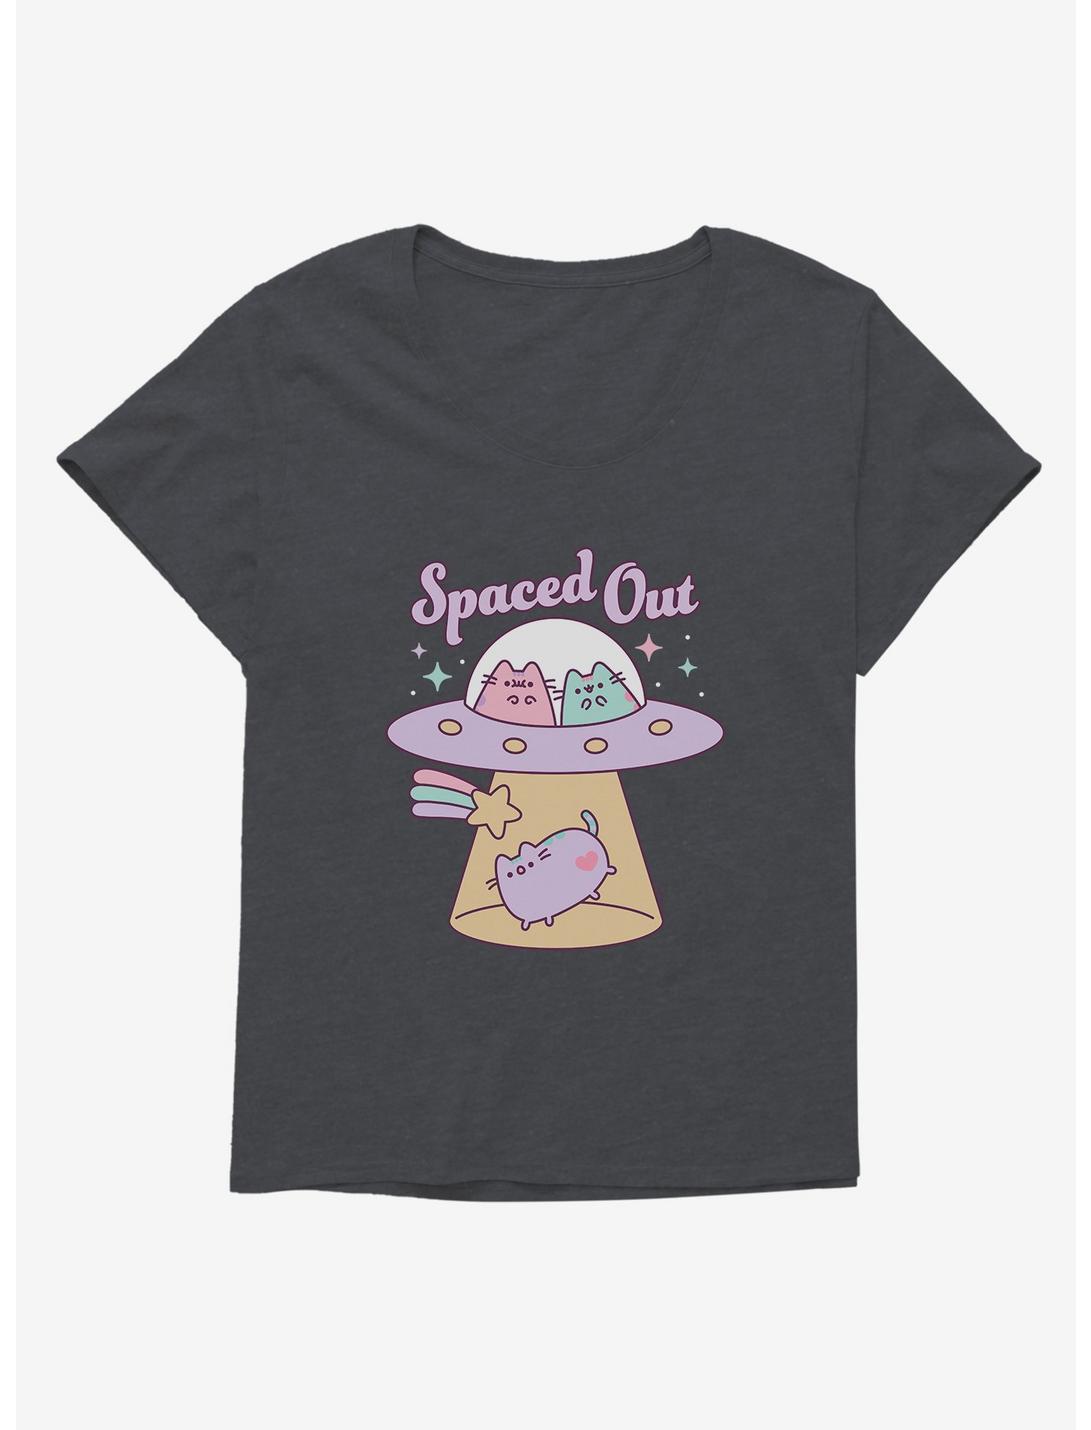 Pusheen Spaced Out Girls T-Shirt Plus Size, CHARCOAL HEATHER, hi-res